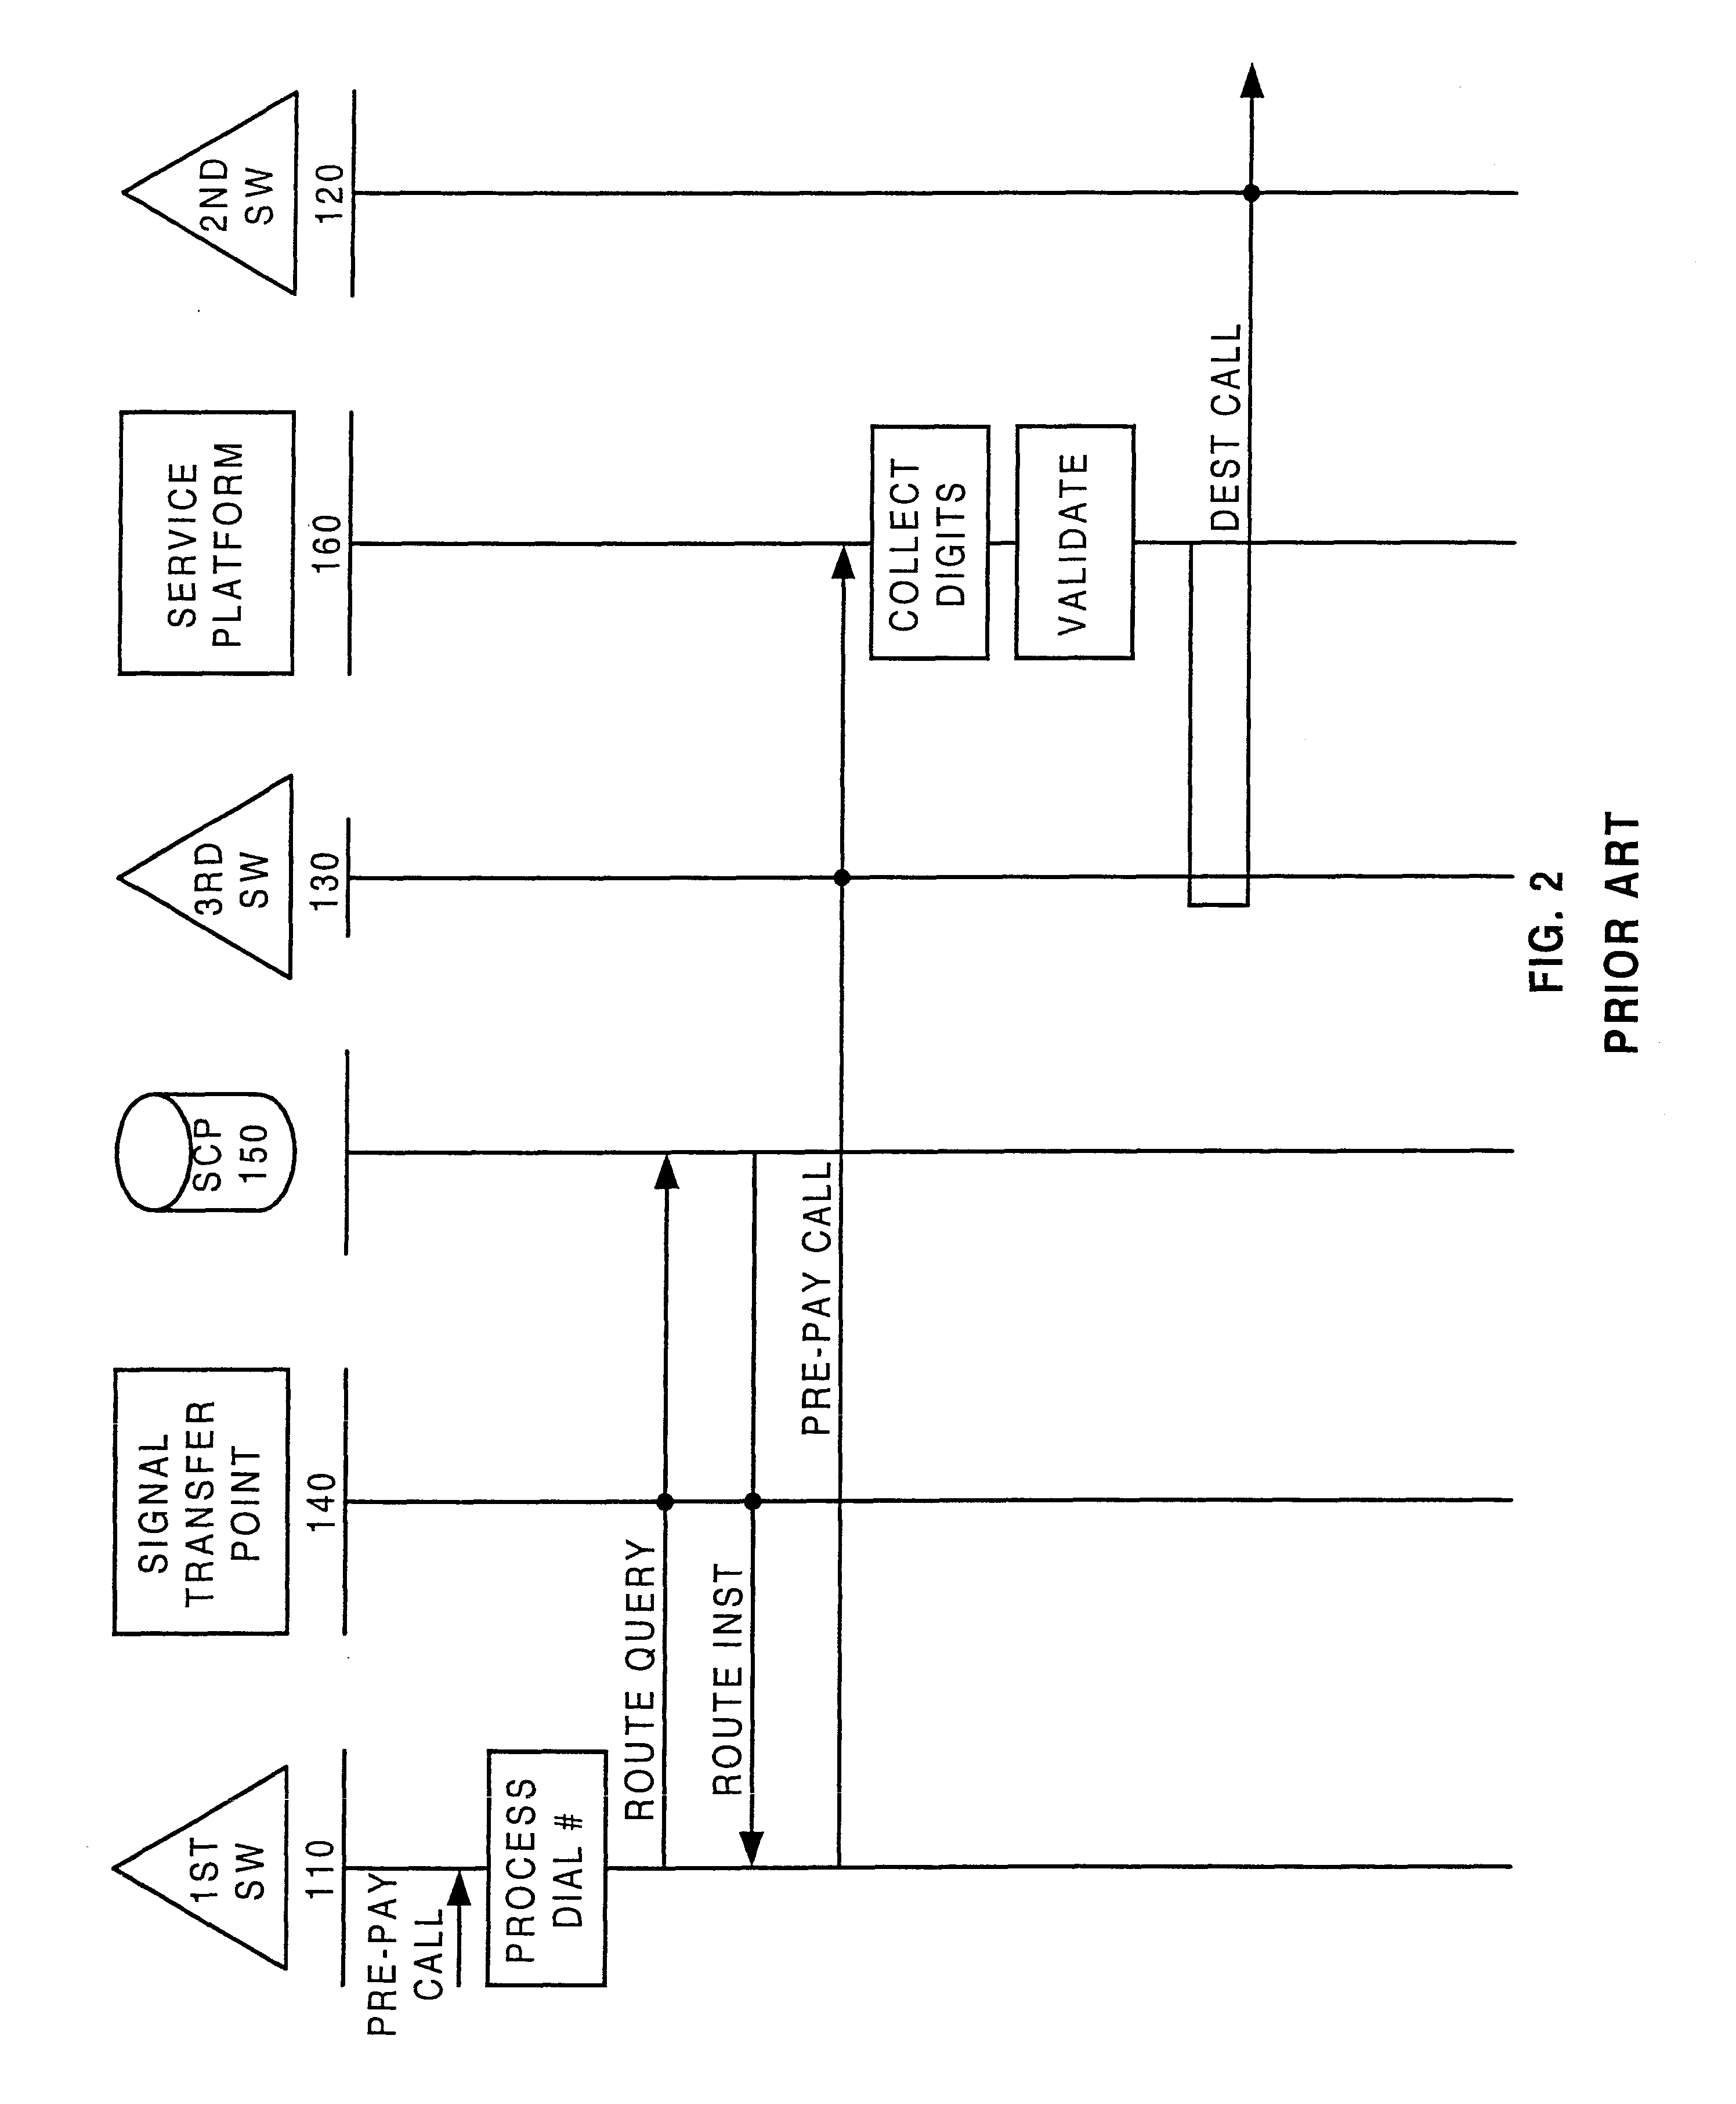 Method and apparatus for validating pre-pay and post-pay communication services using the same integrated database